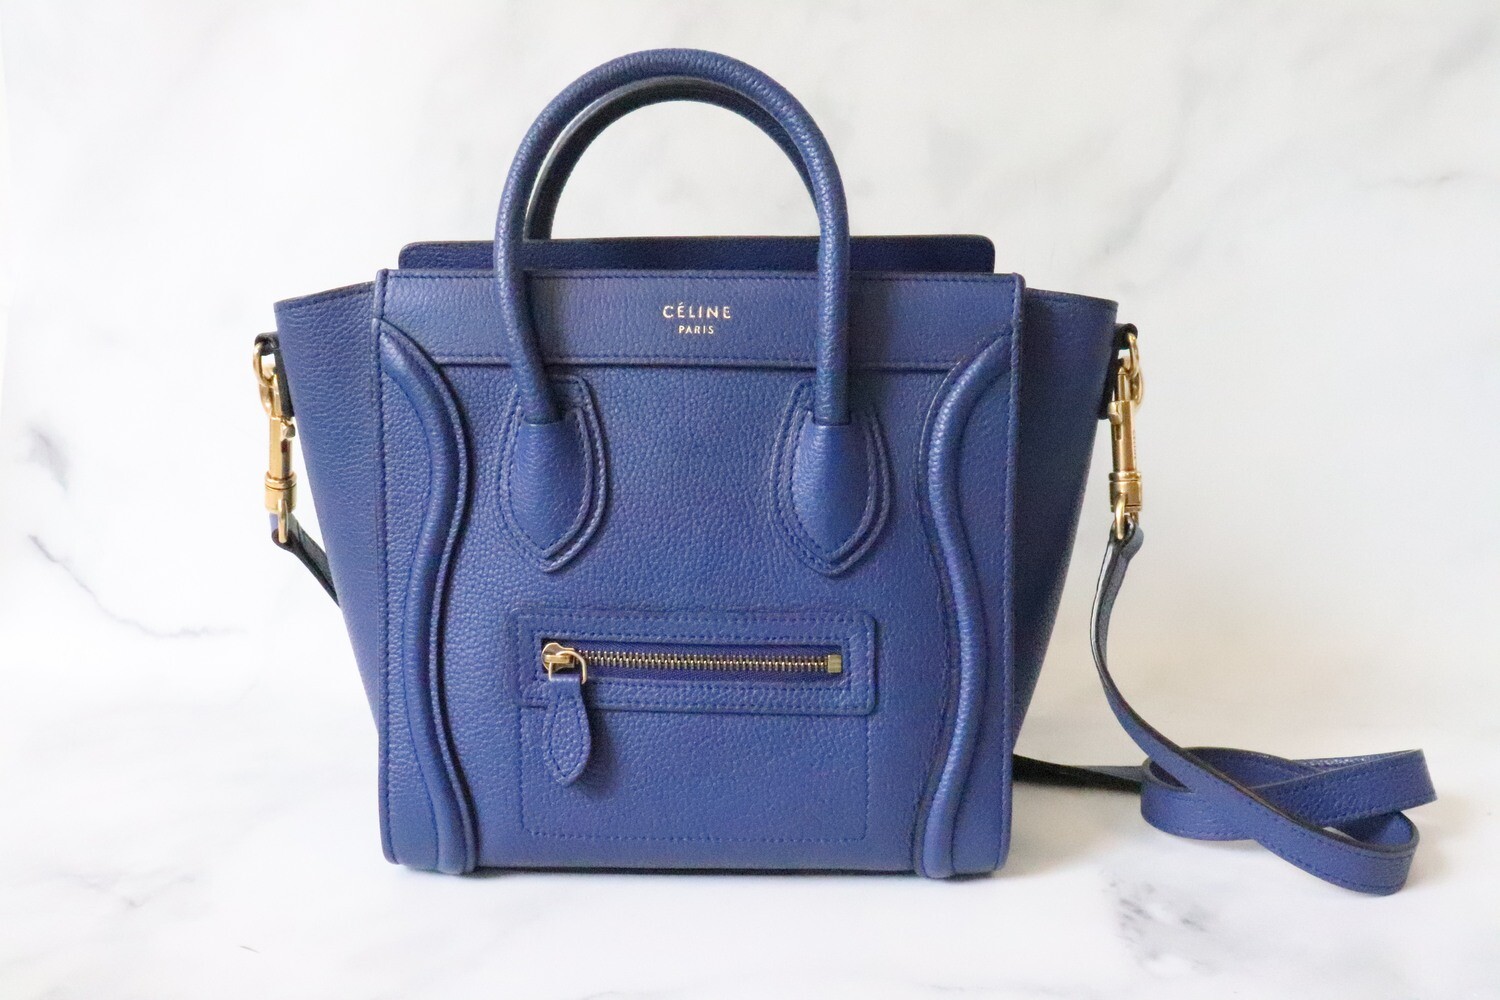 Celine Luggage Nano, Royal Blue Pebbled Leather, Gold Hardware, Preowned - No Dustbag